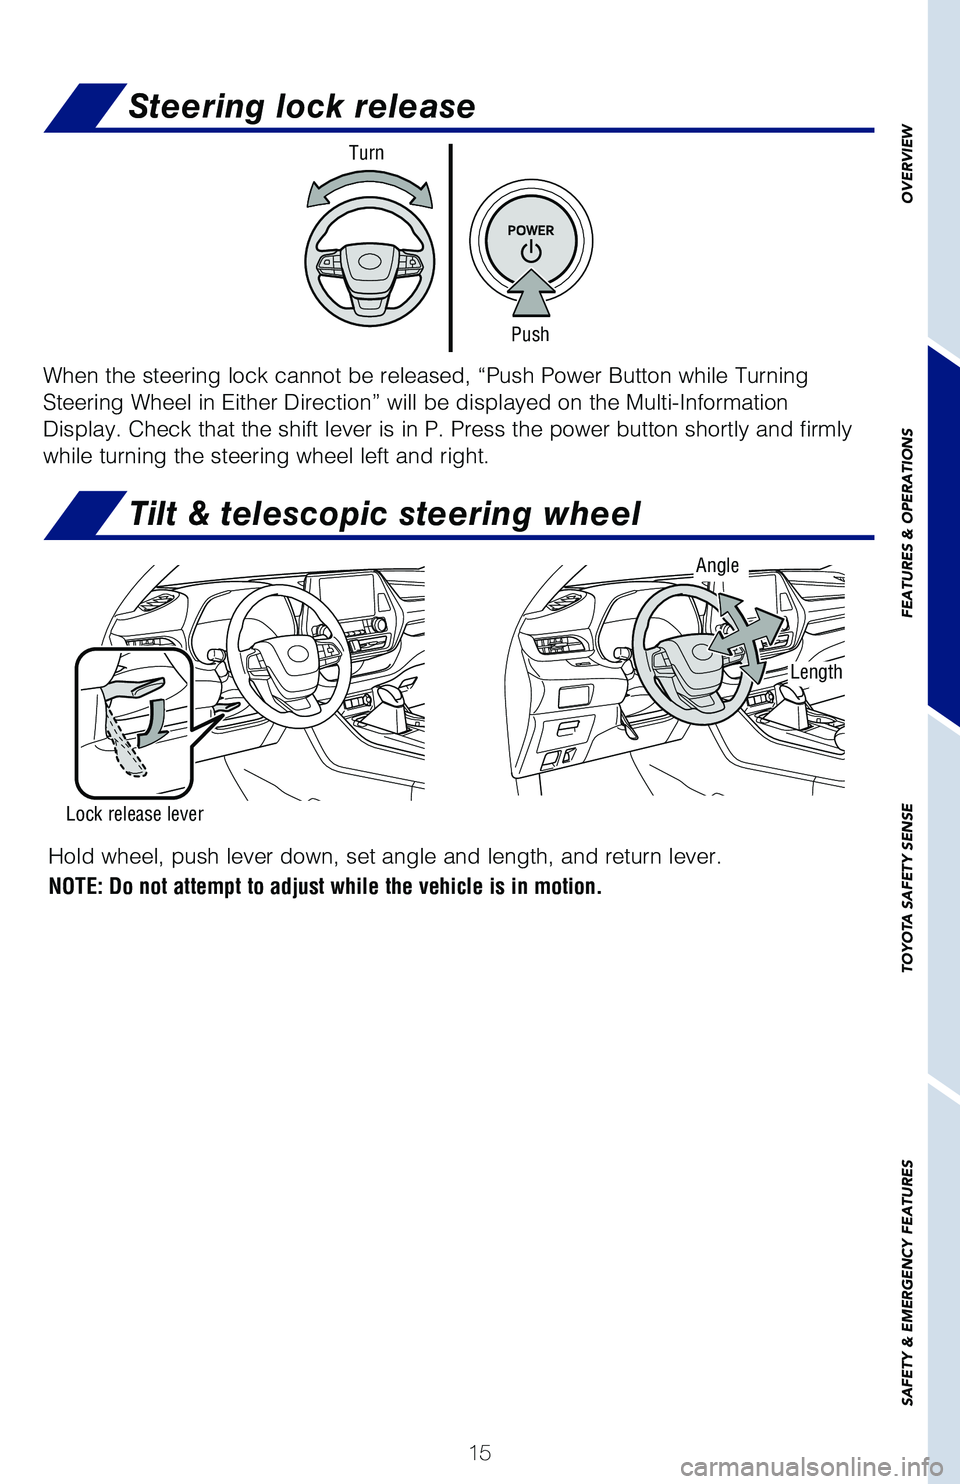 TOYOTA HIGHLANDER HYBRID 2021  Owners Manual (in English) 15
OVERVIEW
FEATURES & OPERATIONS
TOYOTA SAFETY SENSE
SAFETY & EMERGENCY FEATURES
Push
Turn
When the steering lock cannot be released, “Push Power Button while T\�urning 
Steering Wheel in Either 